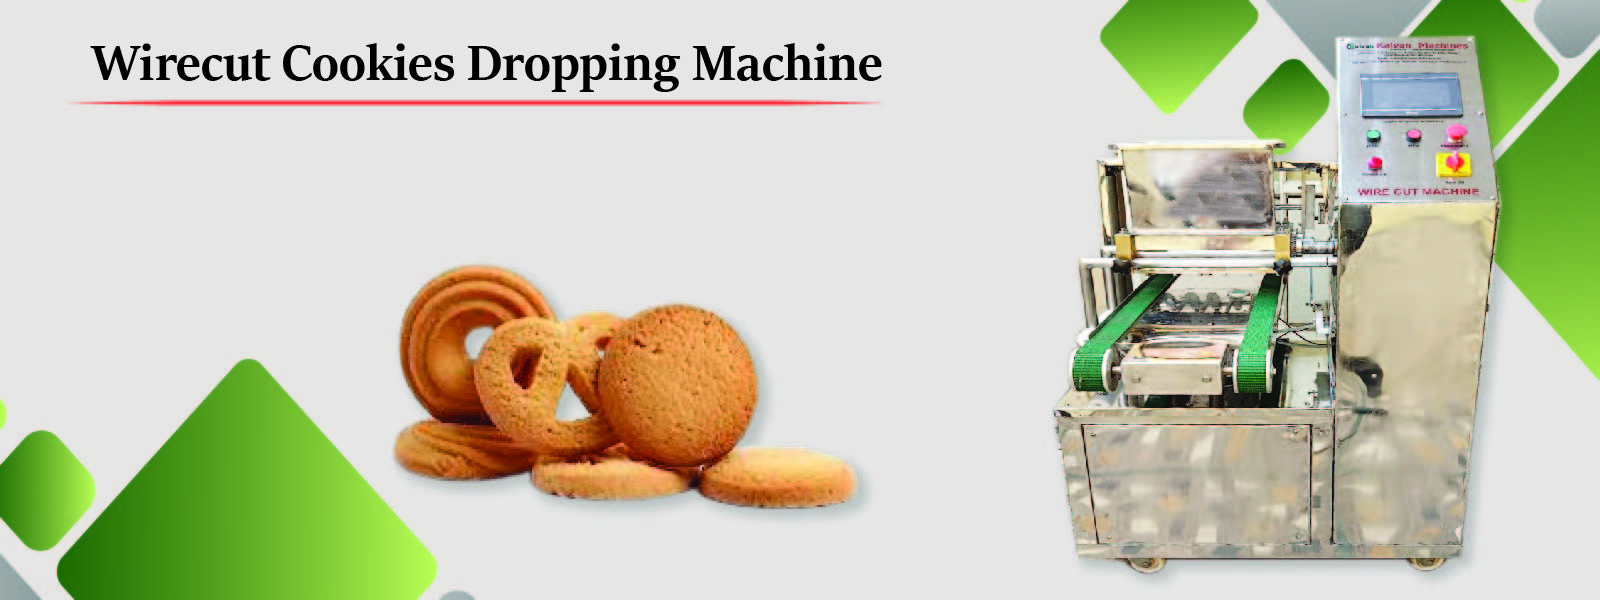 Wirecut Cookies Dropping Machine